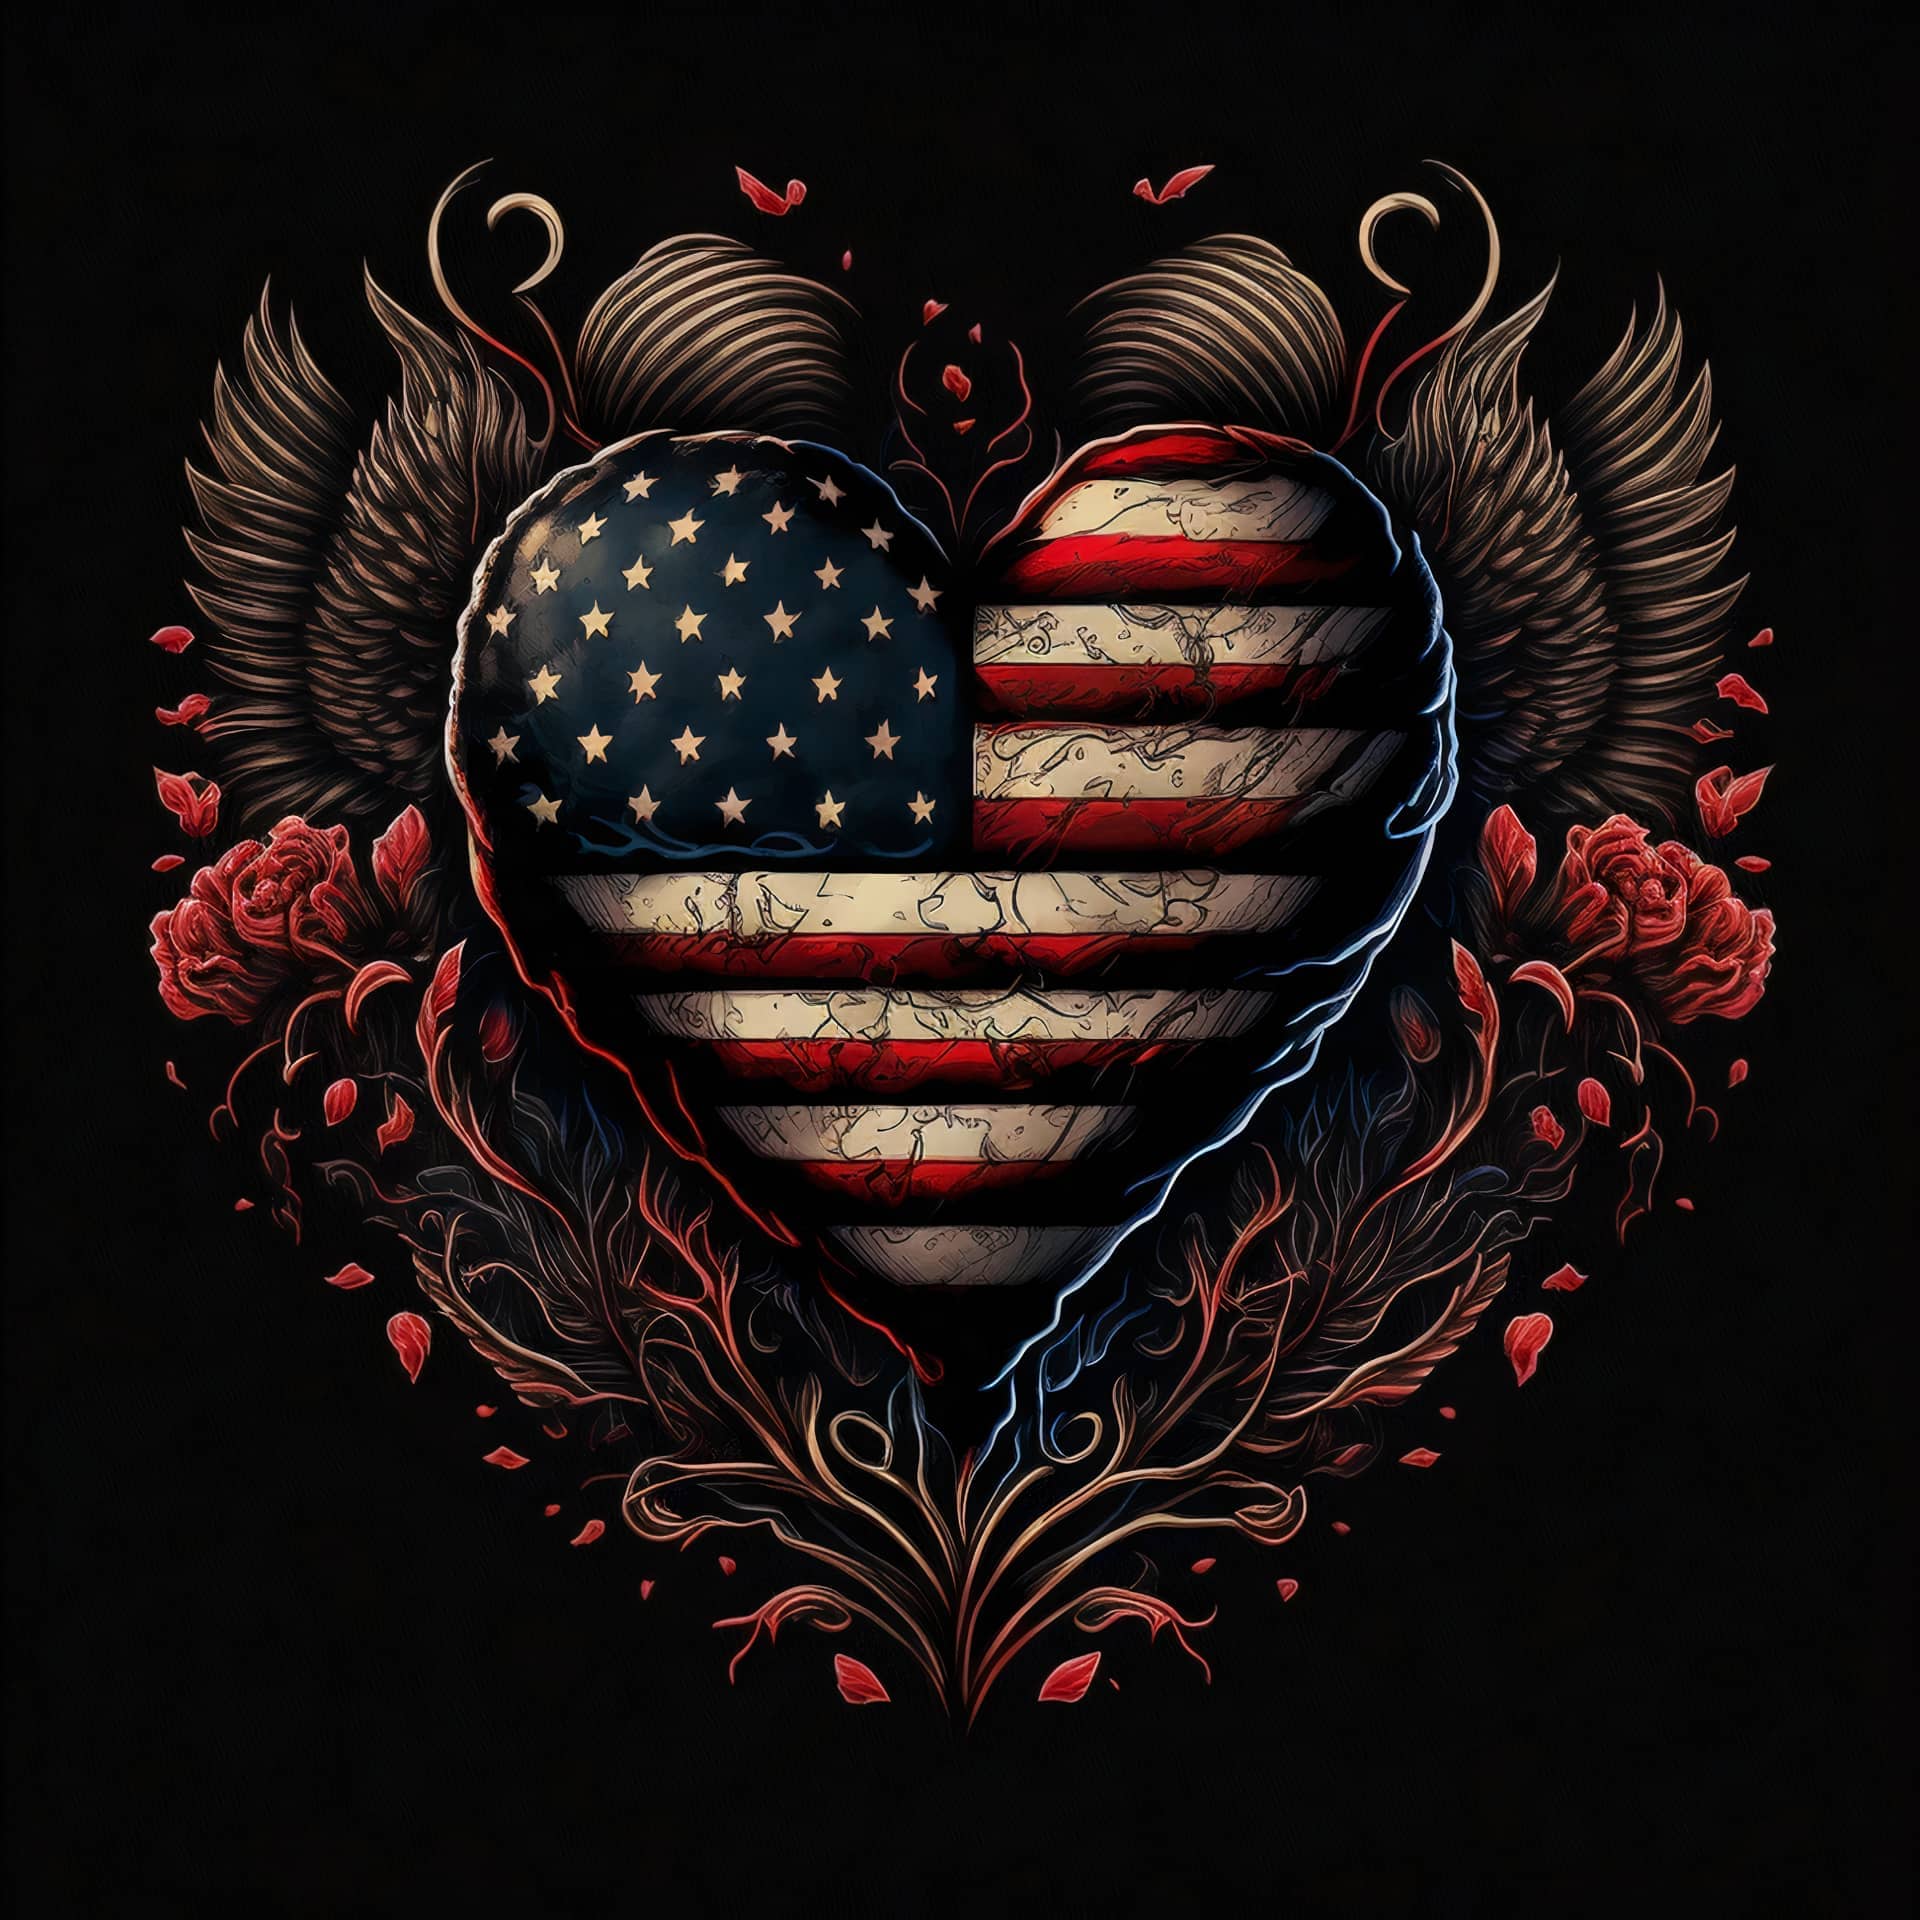 Heart design with american flag image